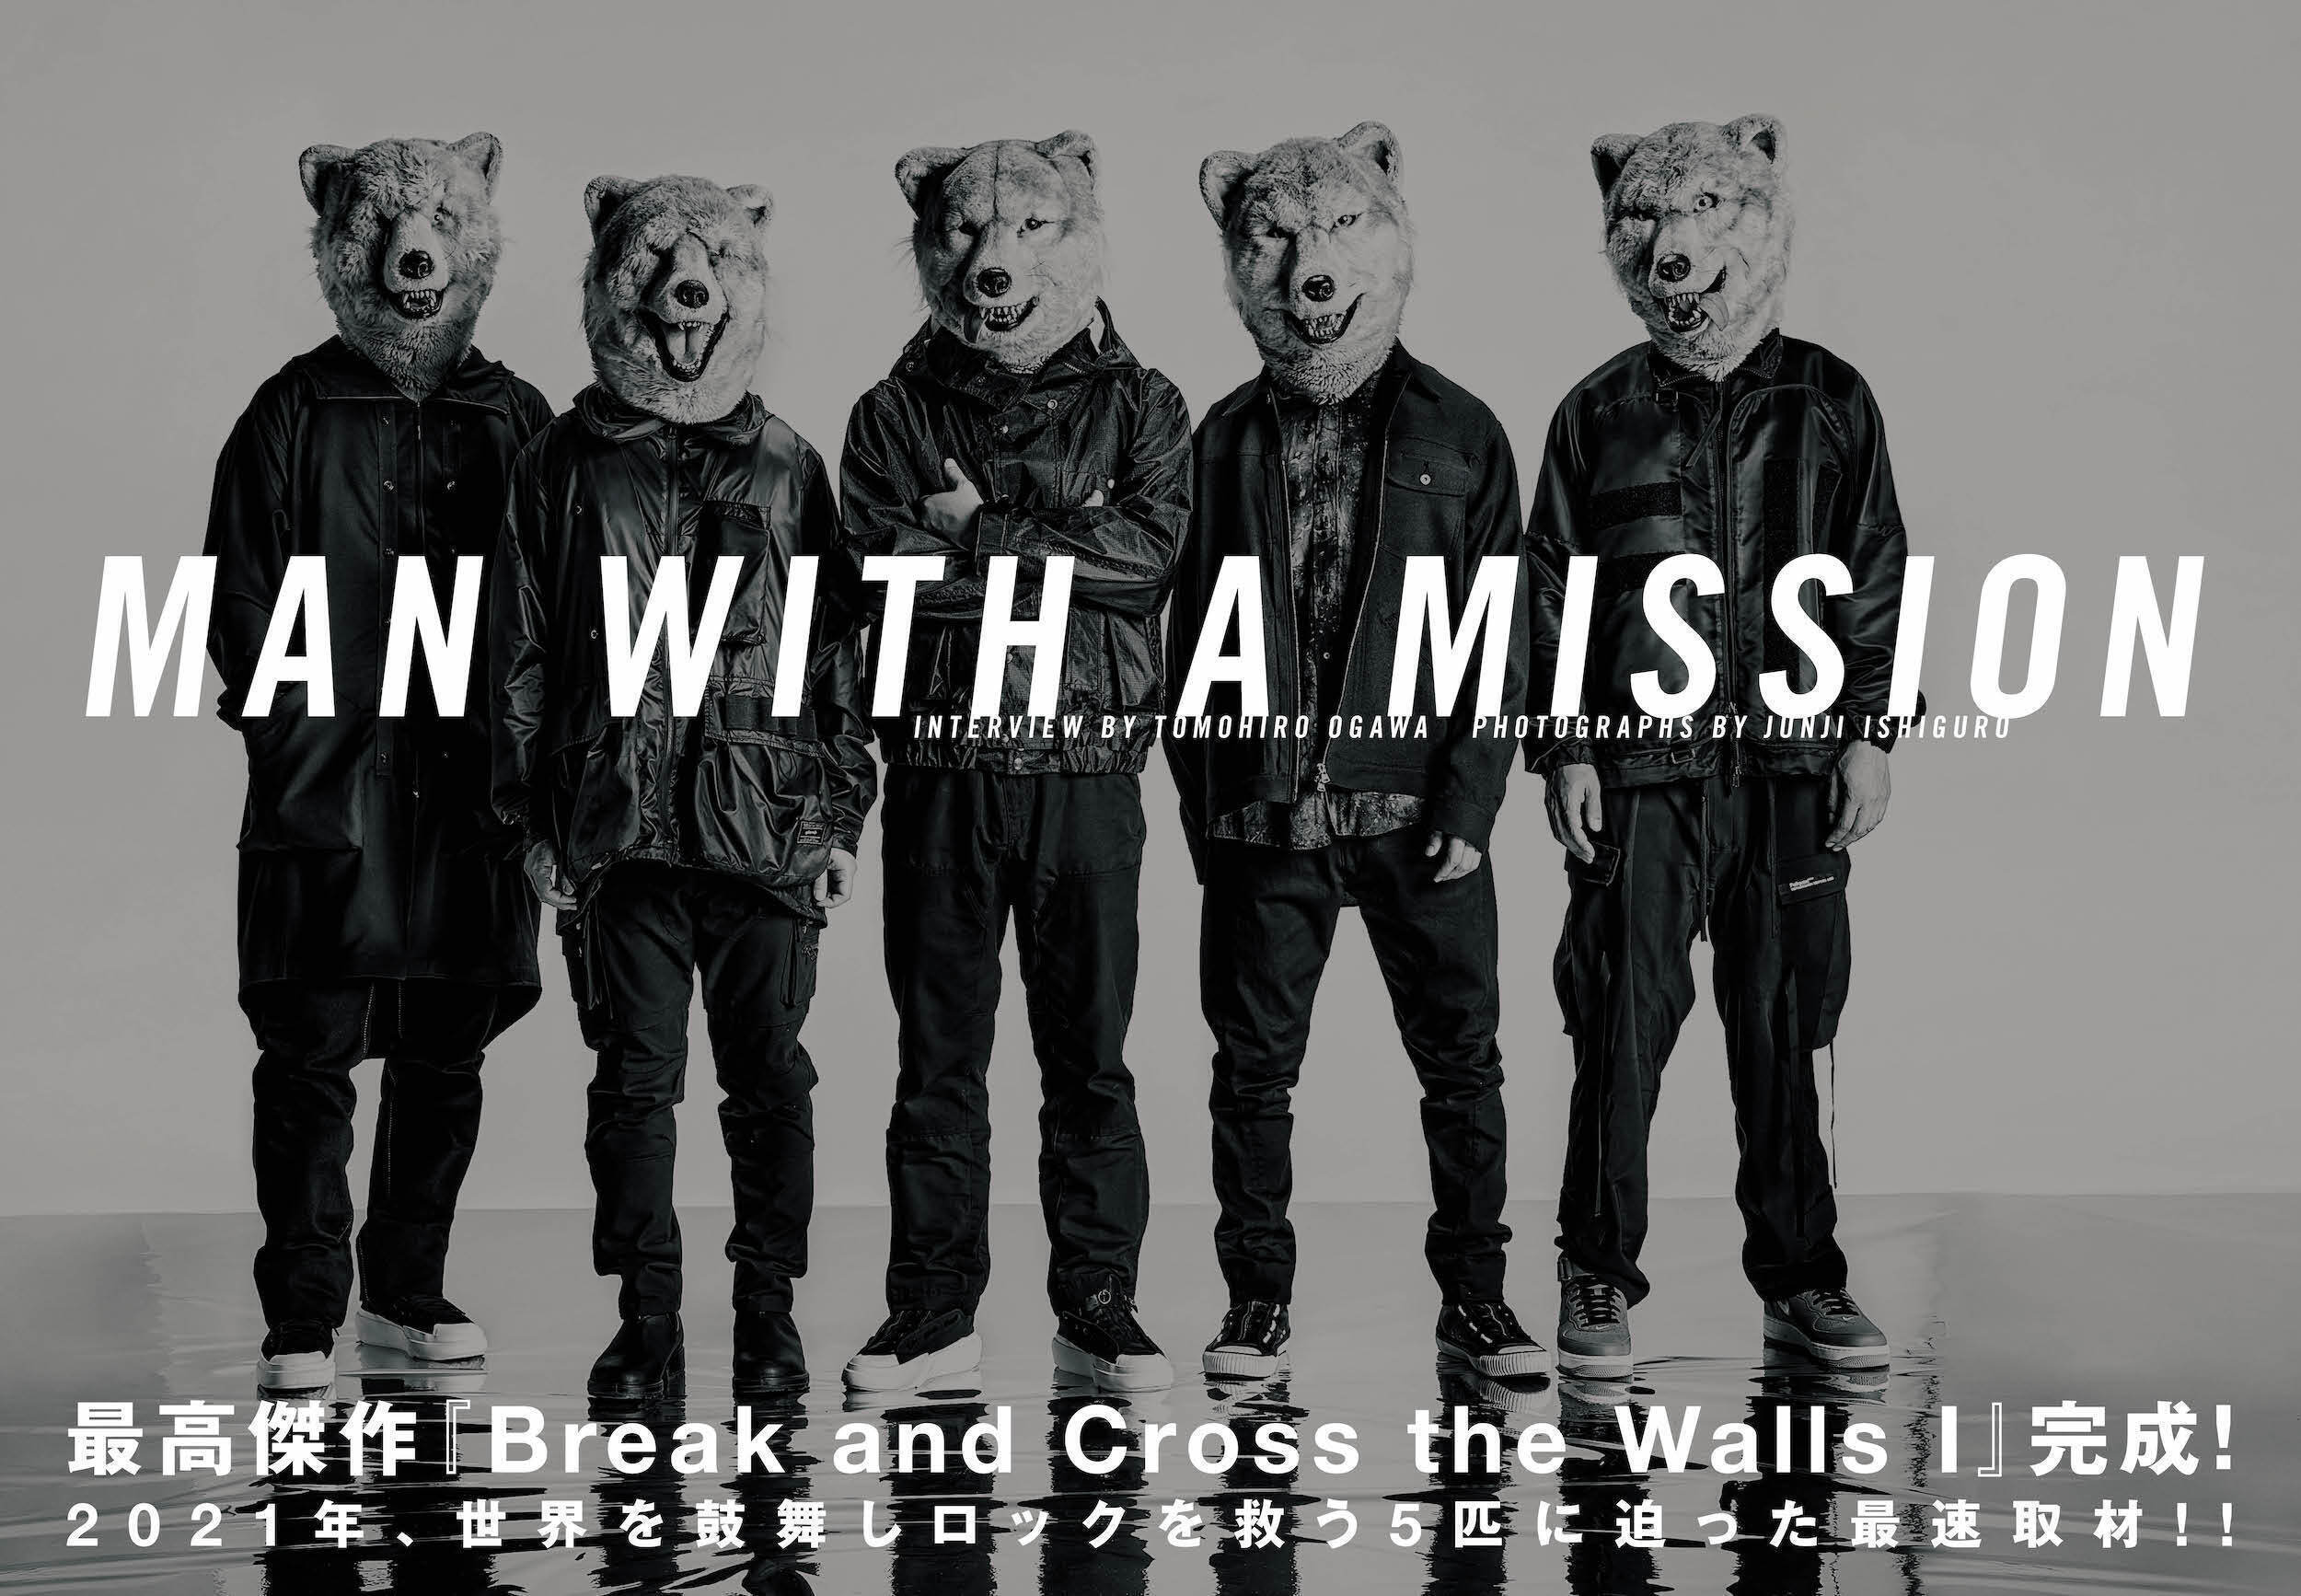 【JAPAN最新号】MAN WITH A MISSION、最高傑作『Break and Cross the Walls I』完成！ 世界を鼓舞しロックを救う5匹に迫った最速取材